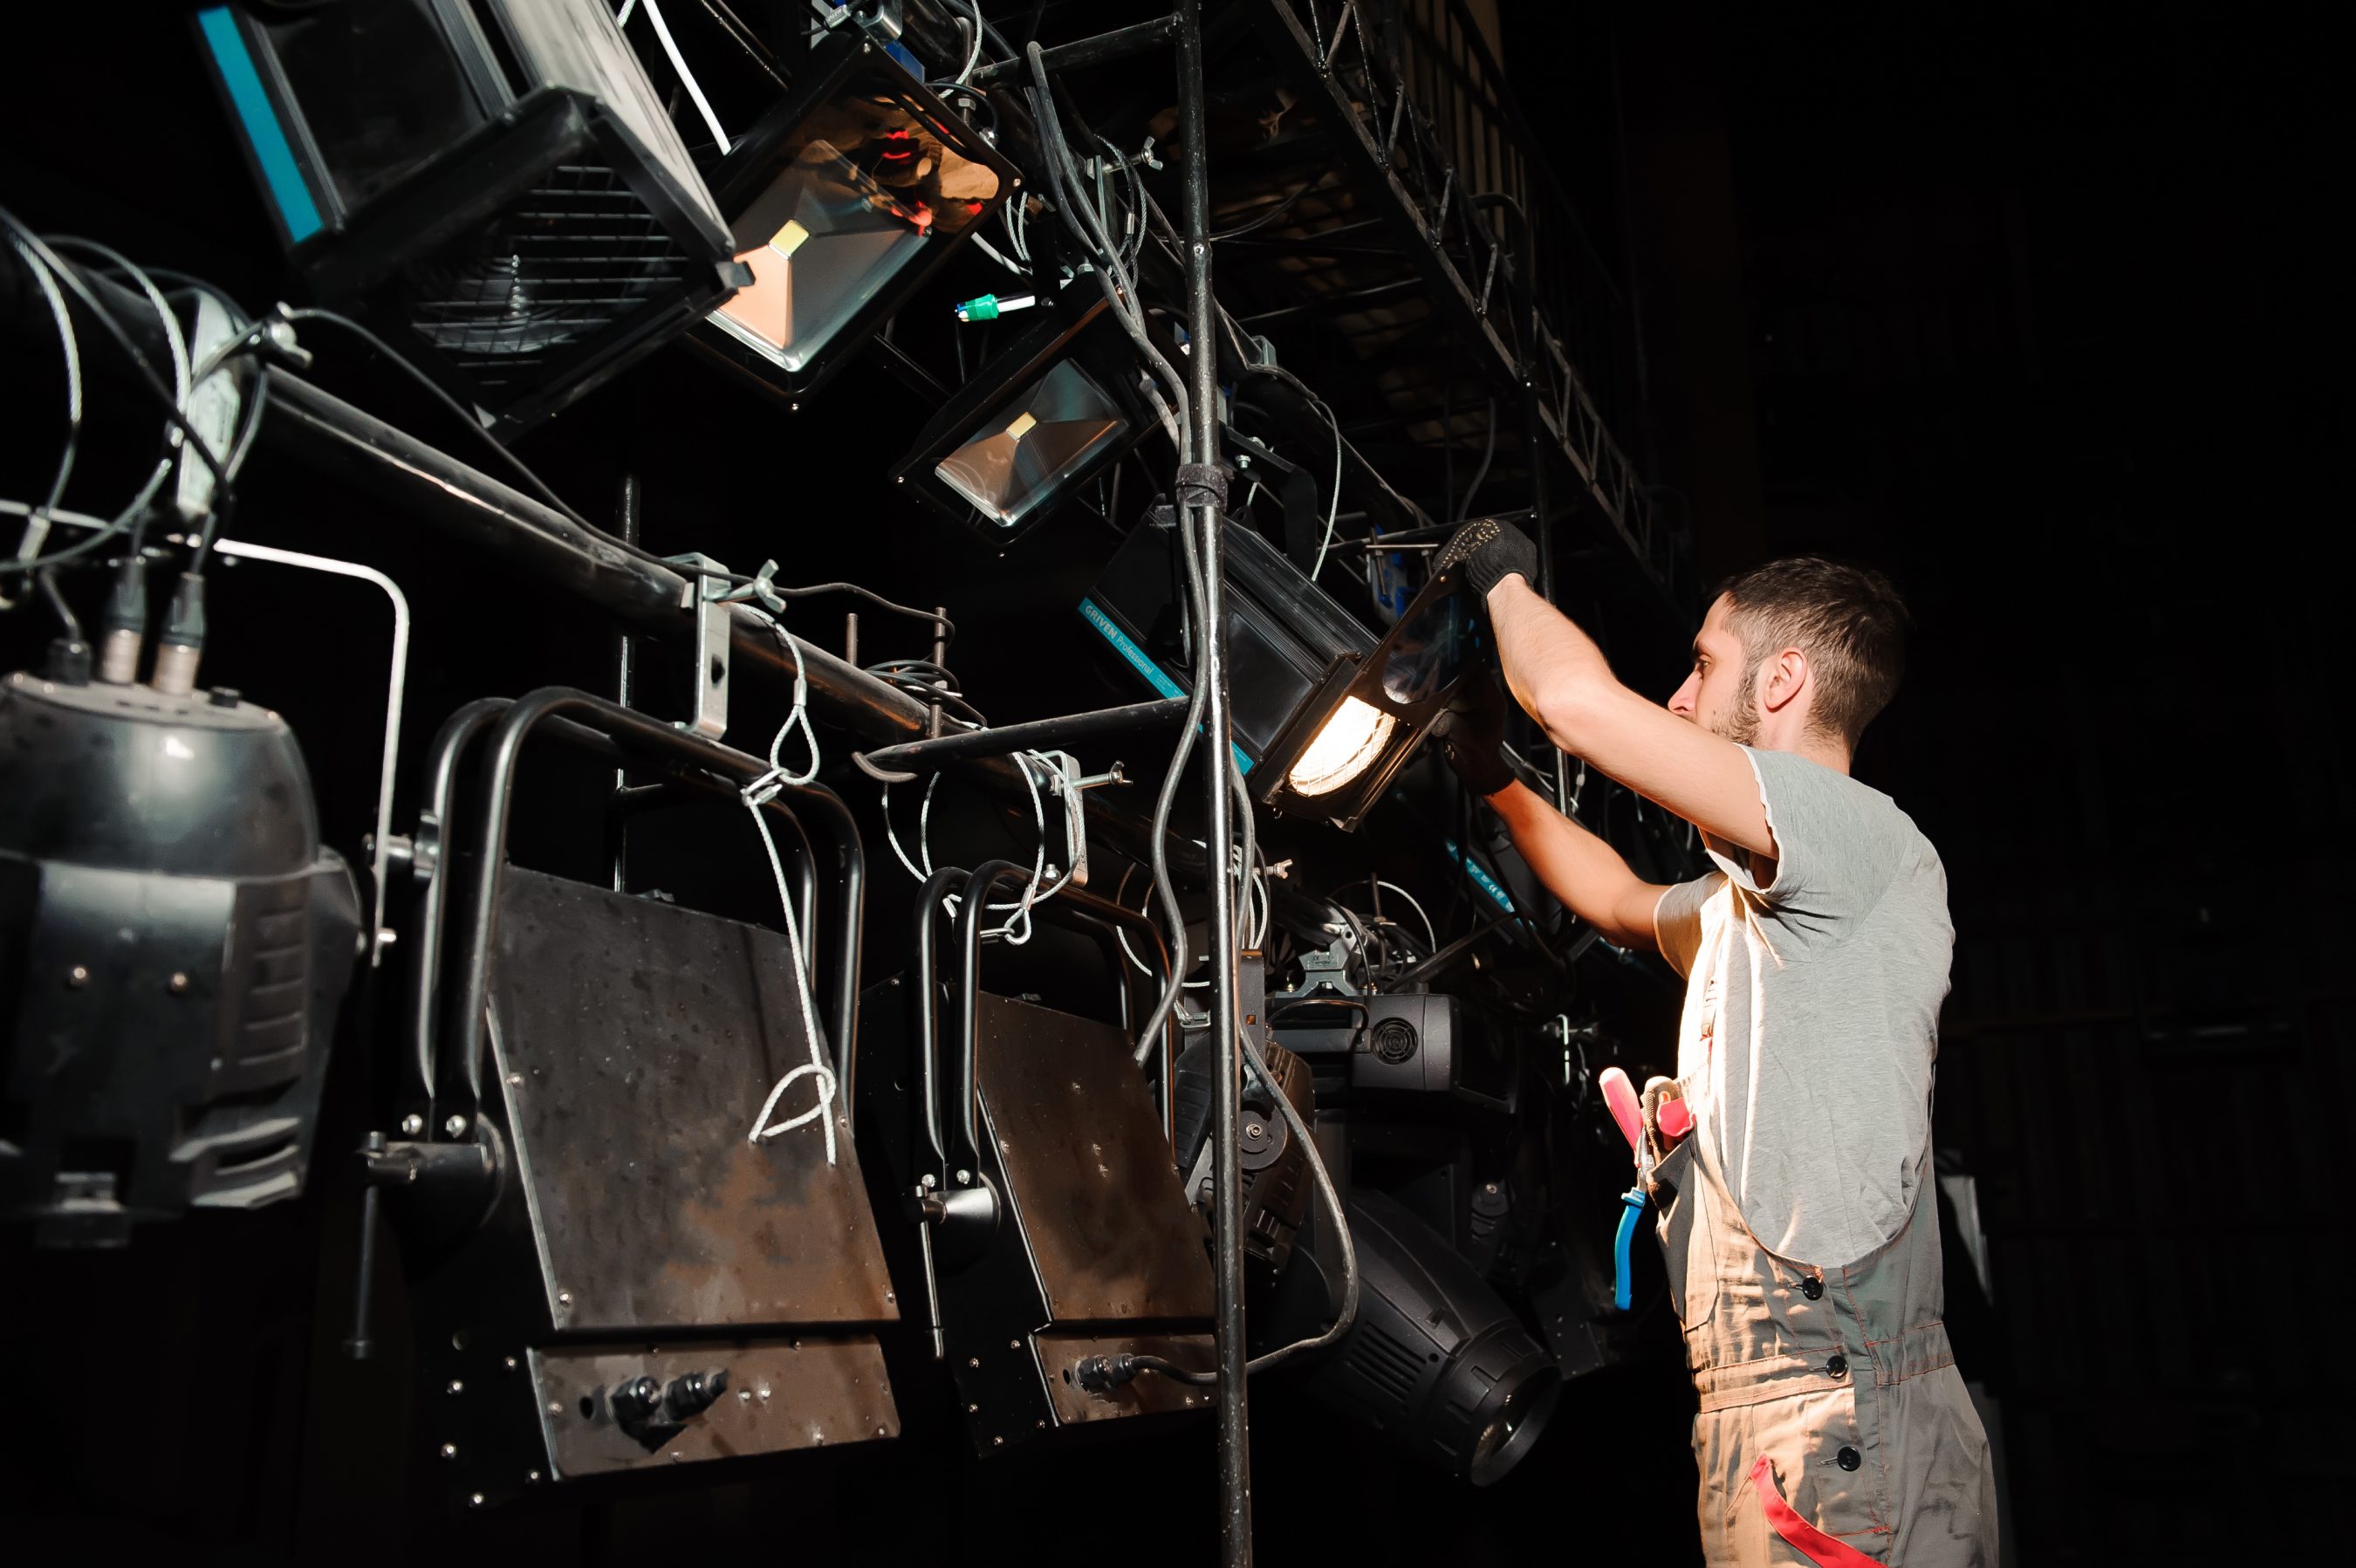 The stage worker sets up the lights